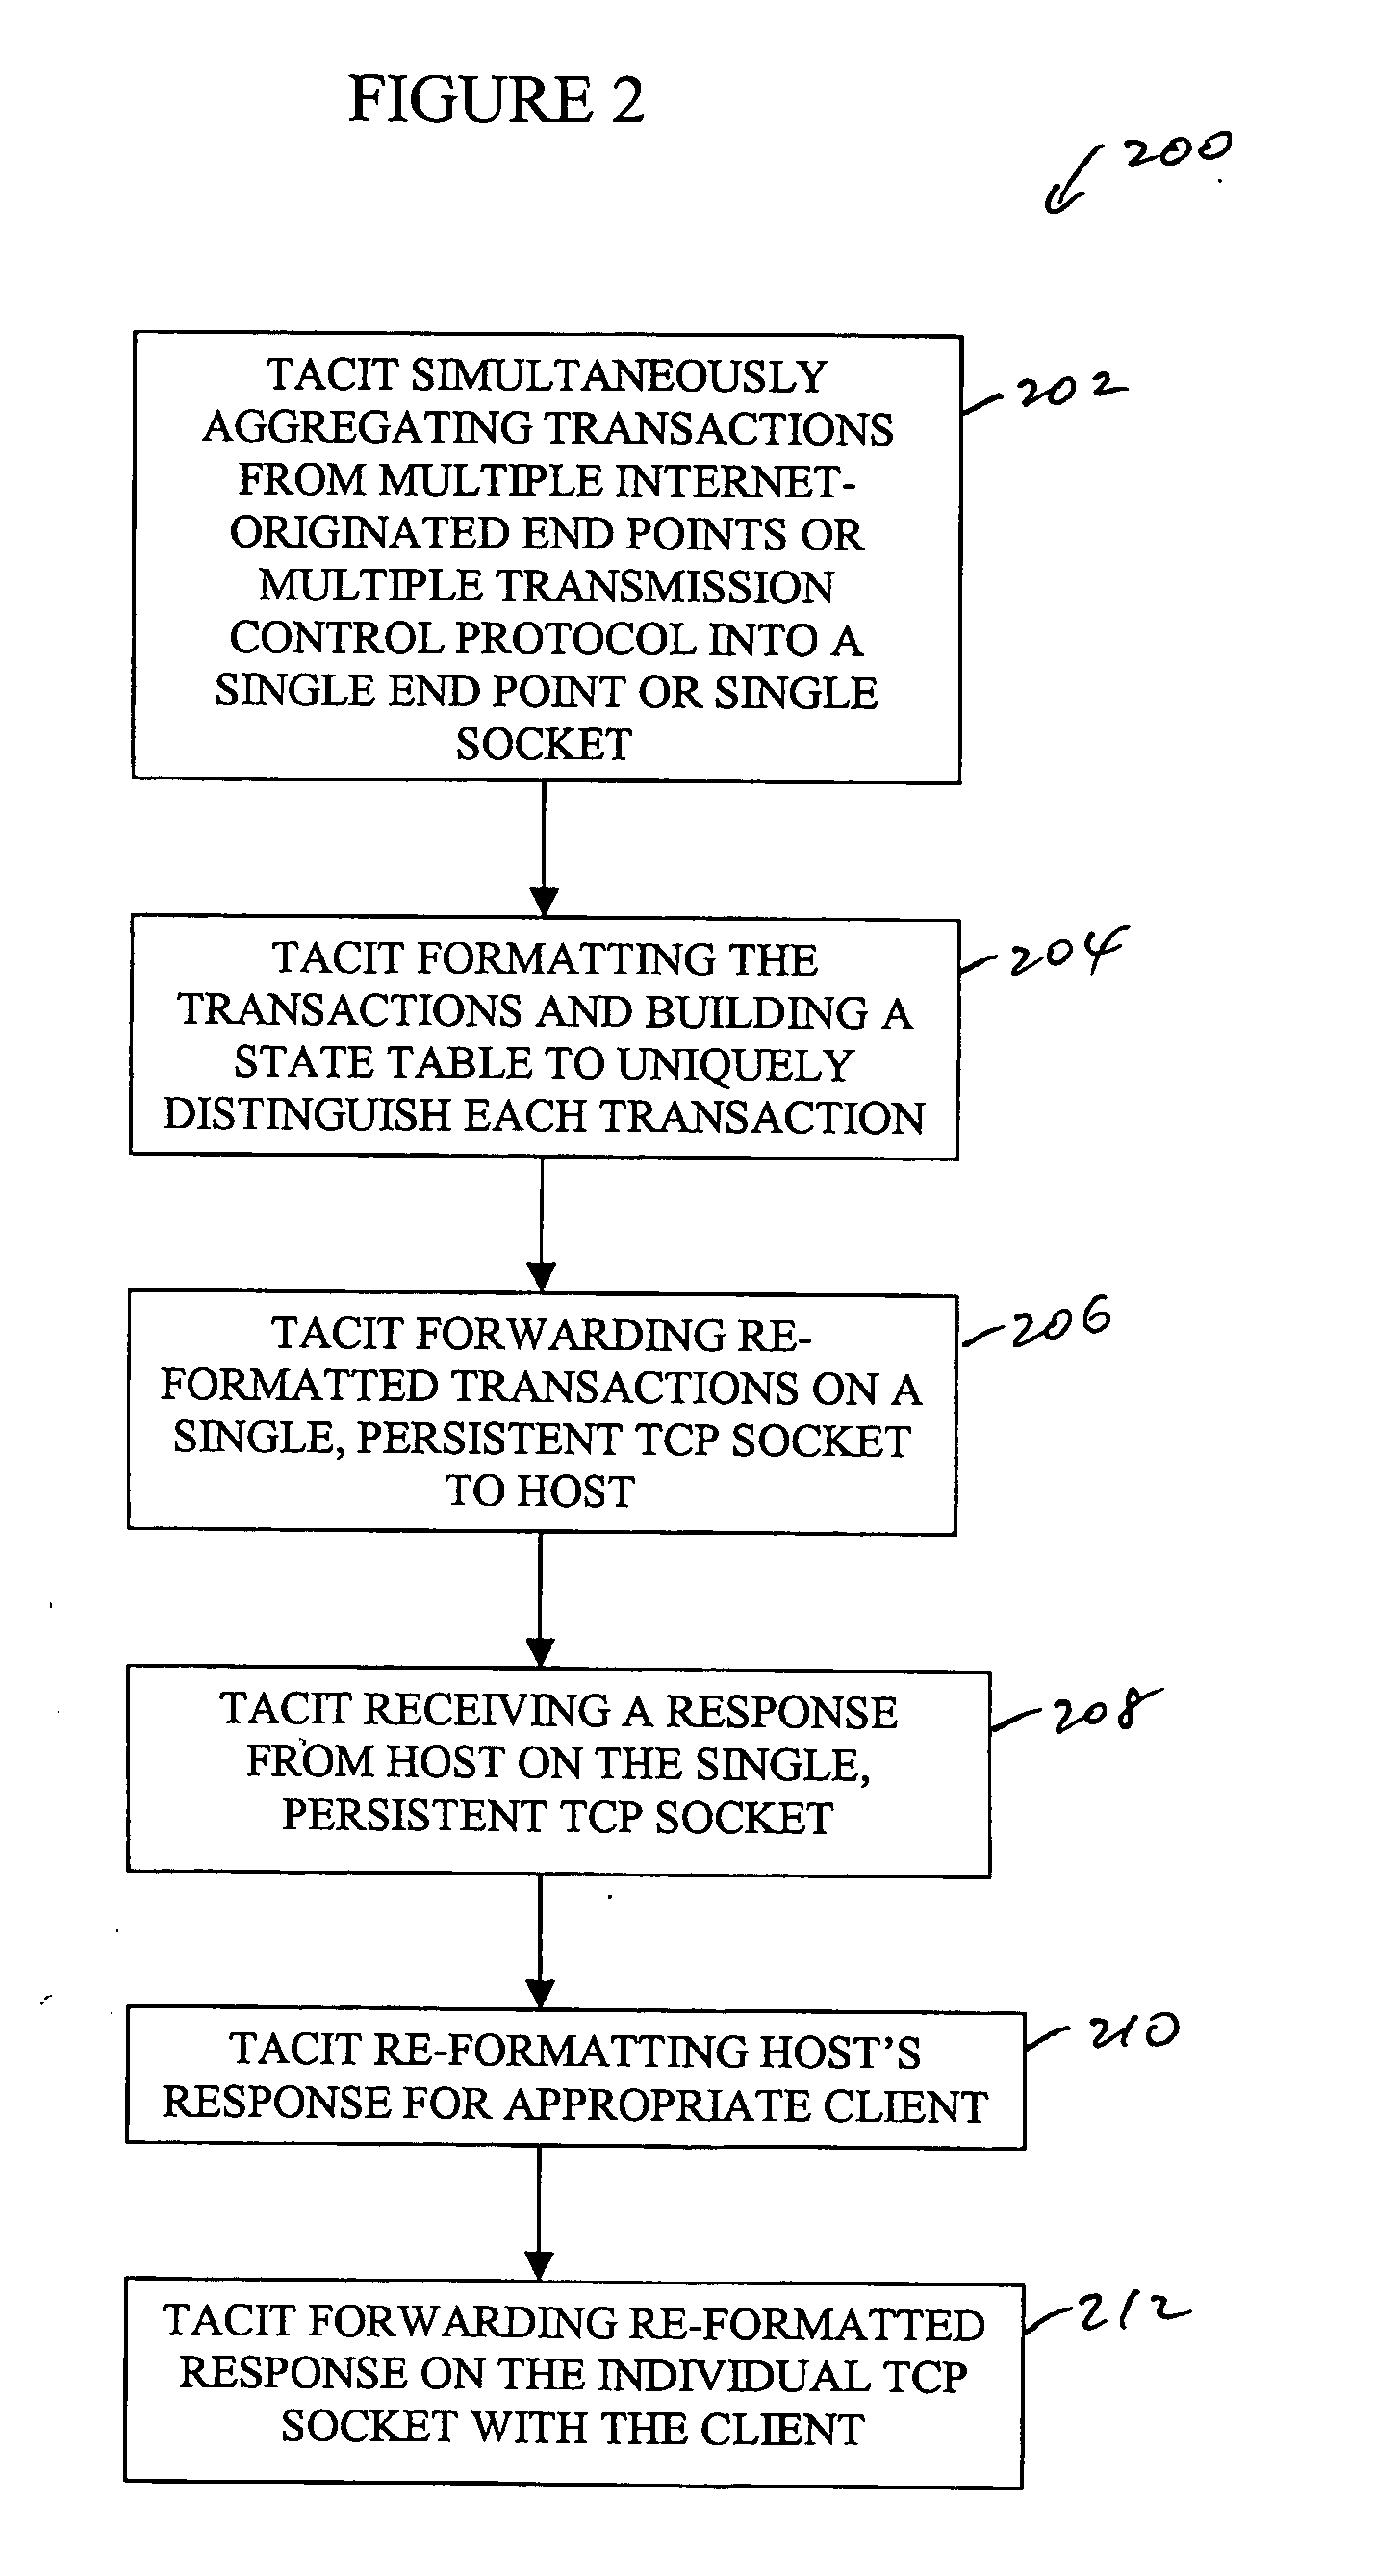 System and method of aggregating multiple transactions over network-based electronic payment transaction processing system